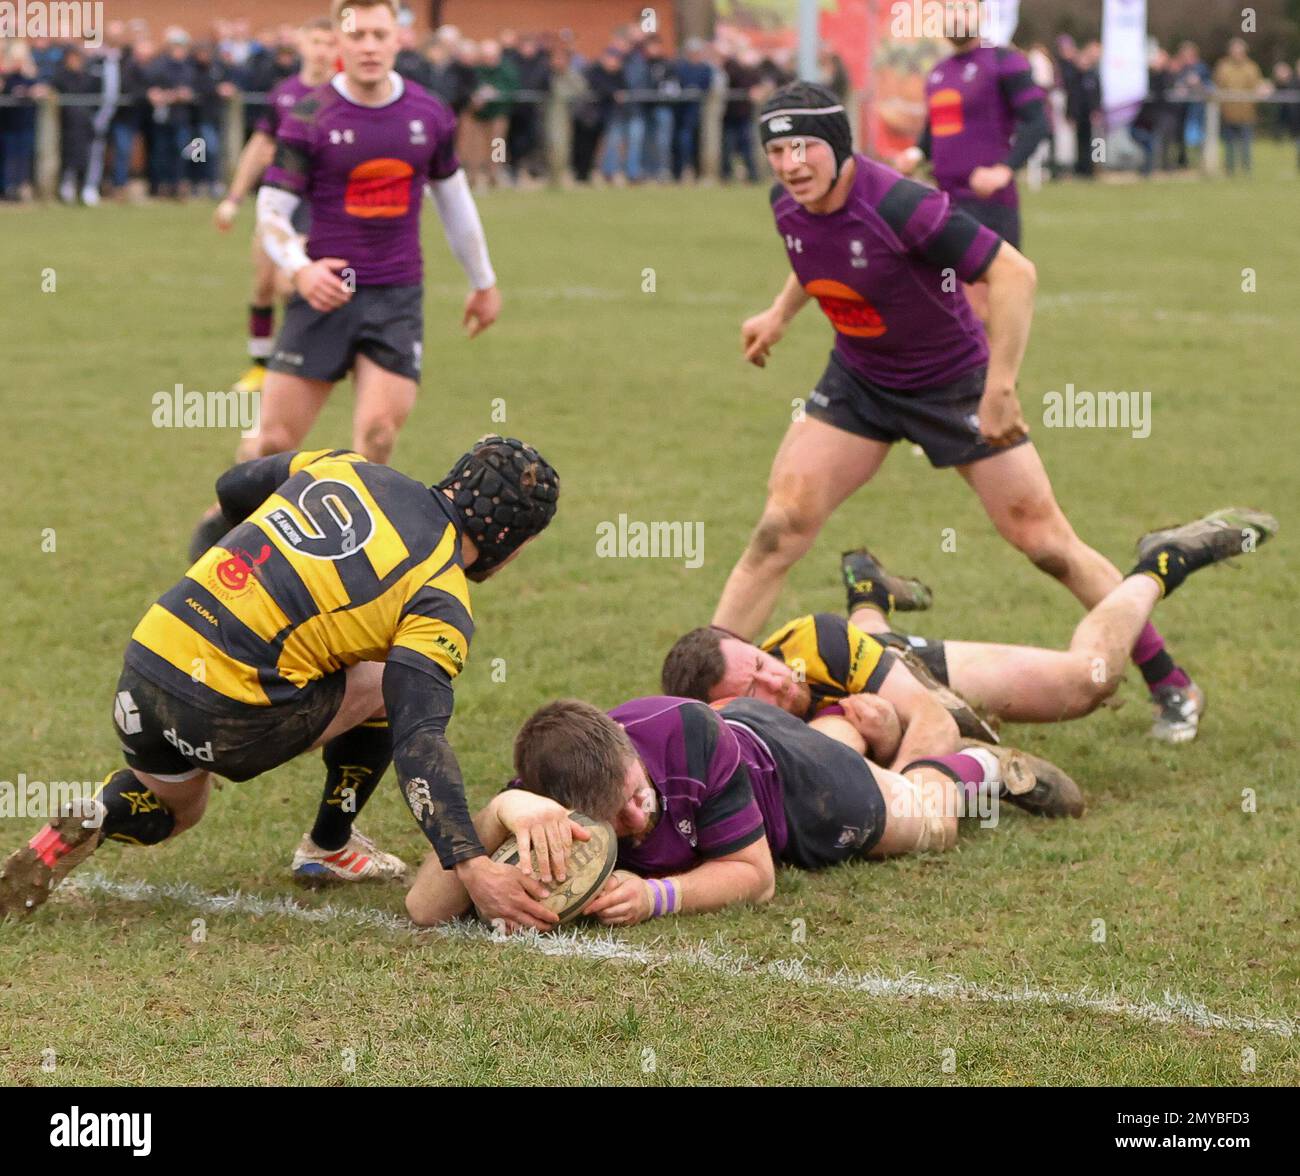 4.02.2022   Leicester, England. Rugby Union.                   LionsNIck Cairns scores in the 57th minute of the National League 2 West match played between Leicester Lions and Hinckley rfc at Westleigh Park, Blaby, Leicester.  © Phil Hutchinson Stock Photo